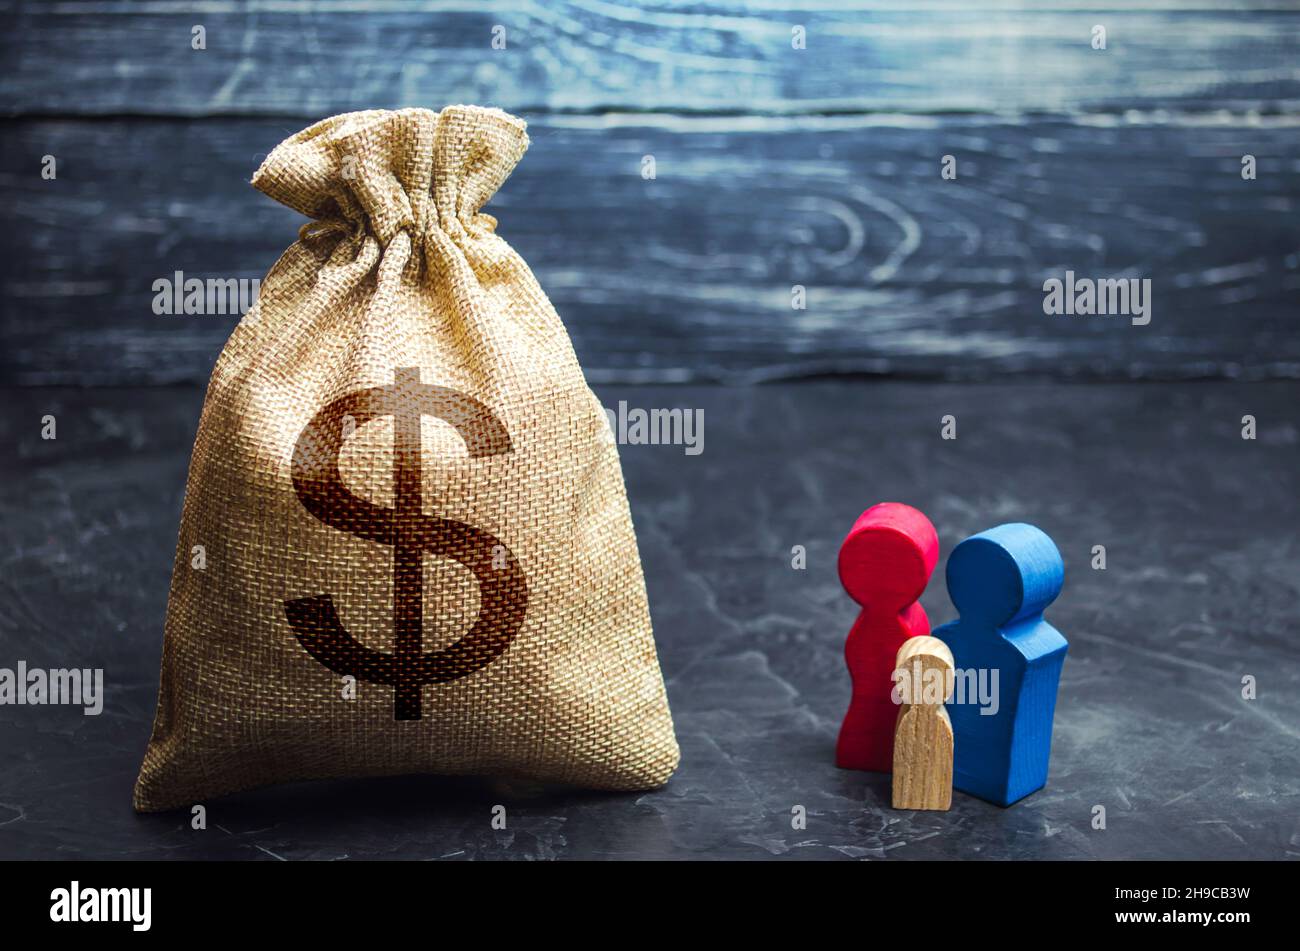 Family figurines and dollar money bag. Social assistance and support. Income level, budget. High debt. Social research, consumer preferences. Segmenta Stock Photo